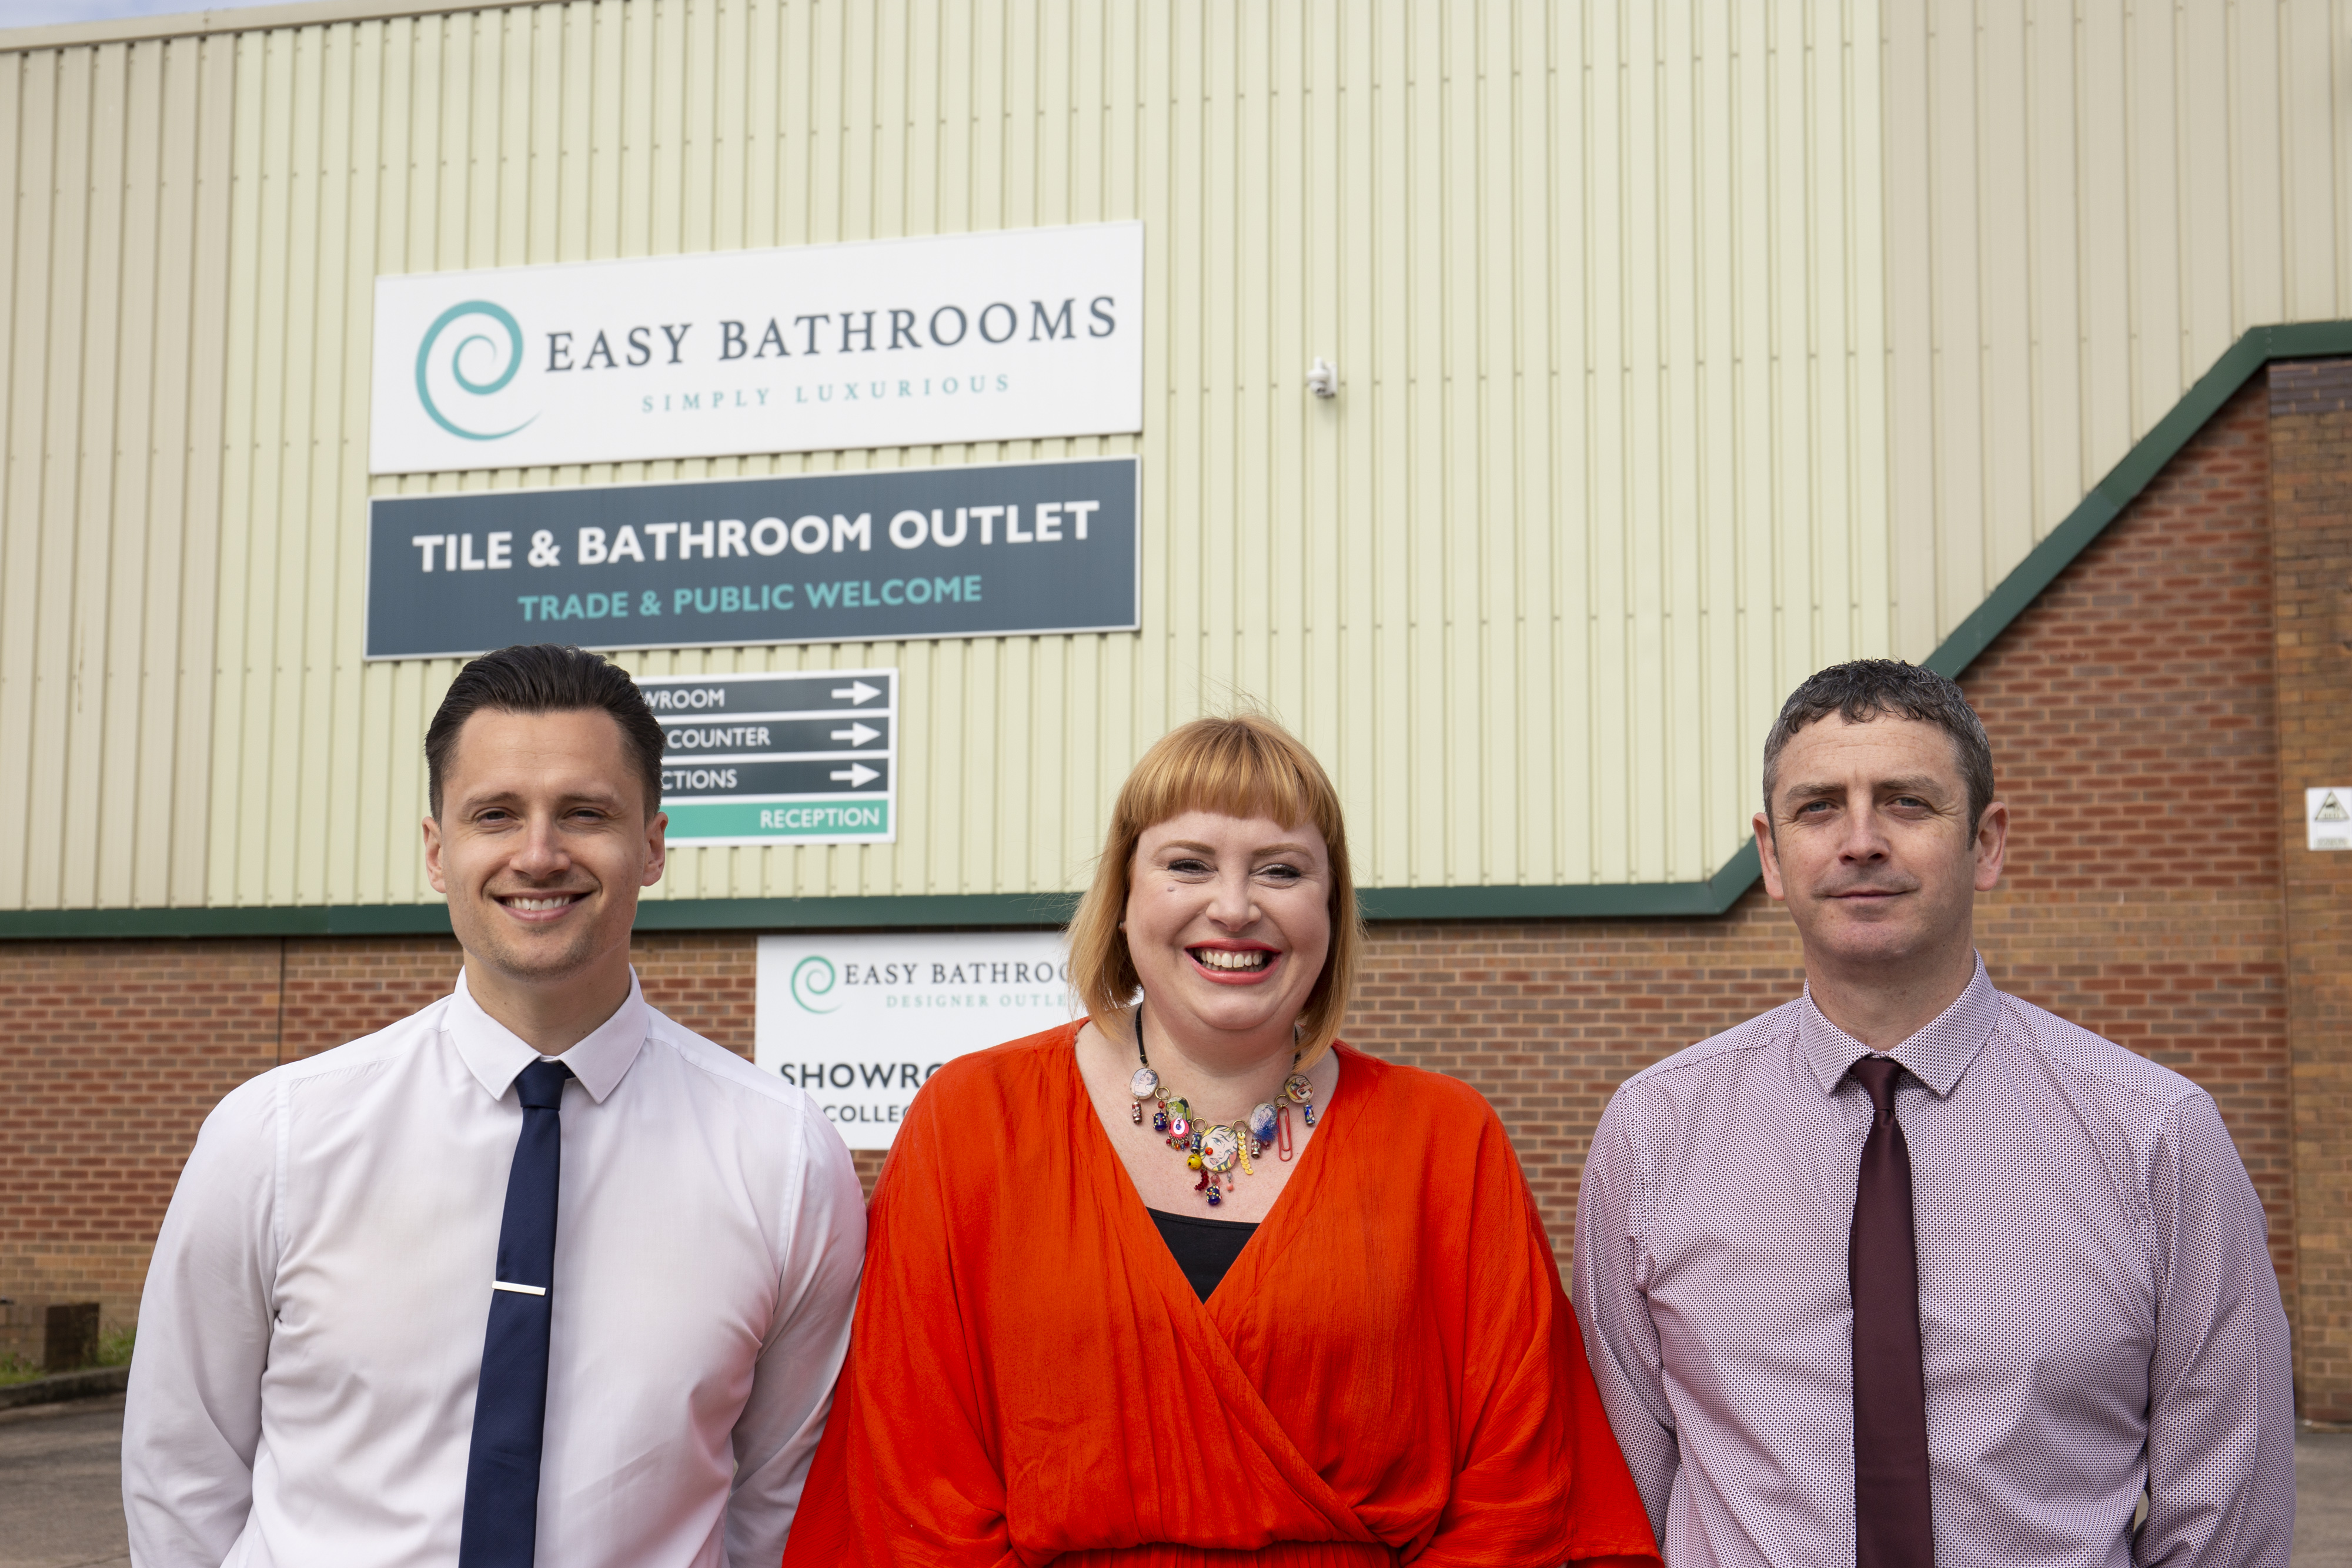 Easy Bathrooms strengthens area sales team to support trades people @easy_bathrooms